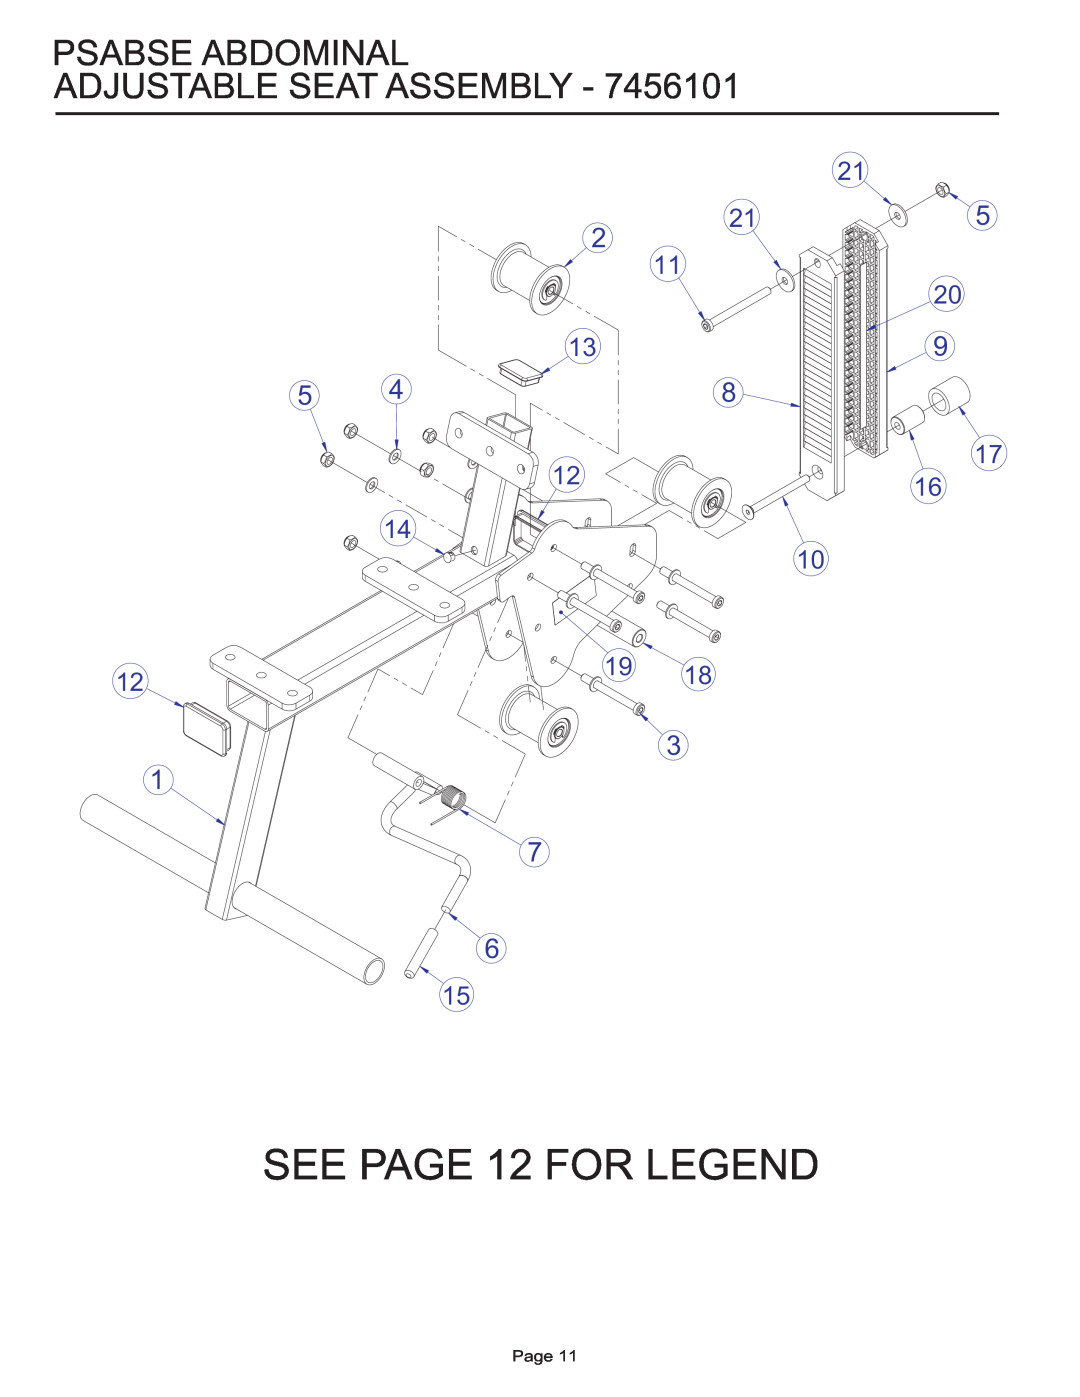 Life Fitness PSABSE manual SEE PAGE 12 FOR LEGEND, Psabse Abdominal Adjustable Seat Assembly, Page 